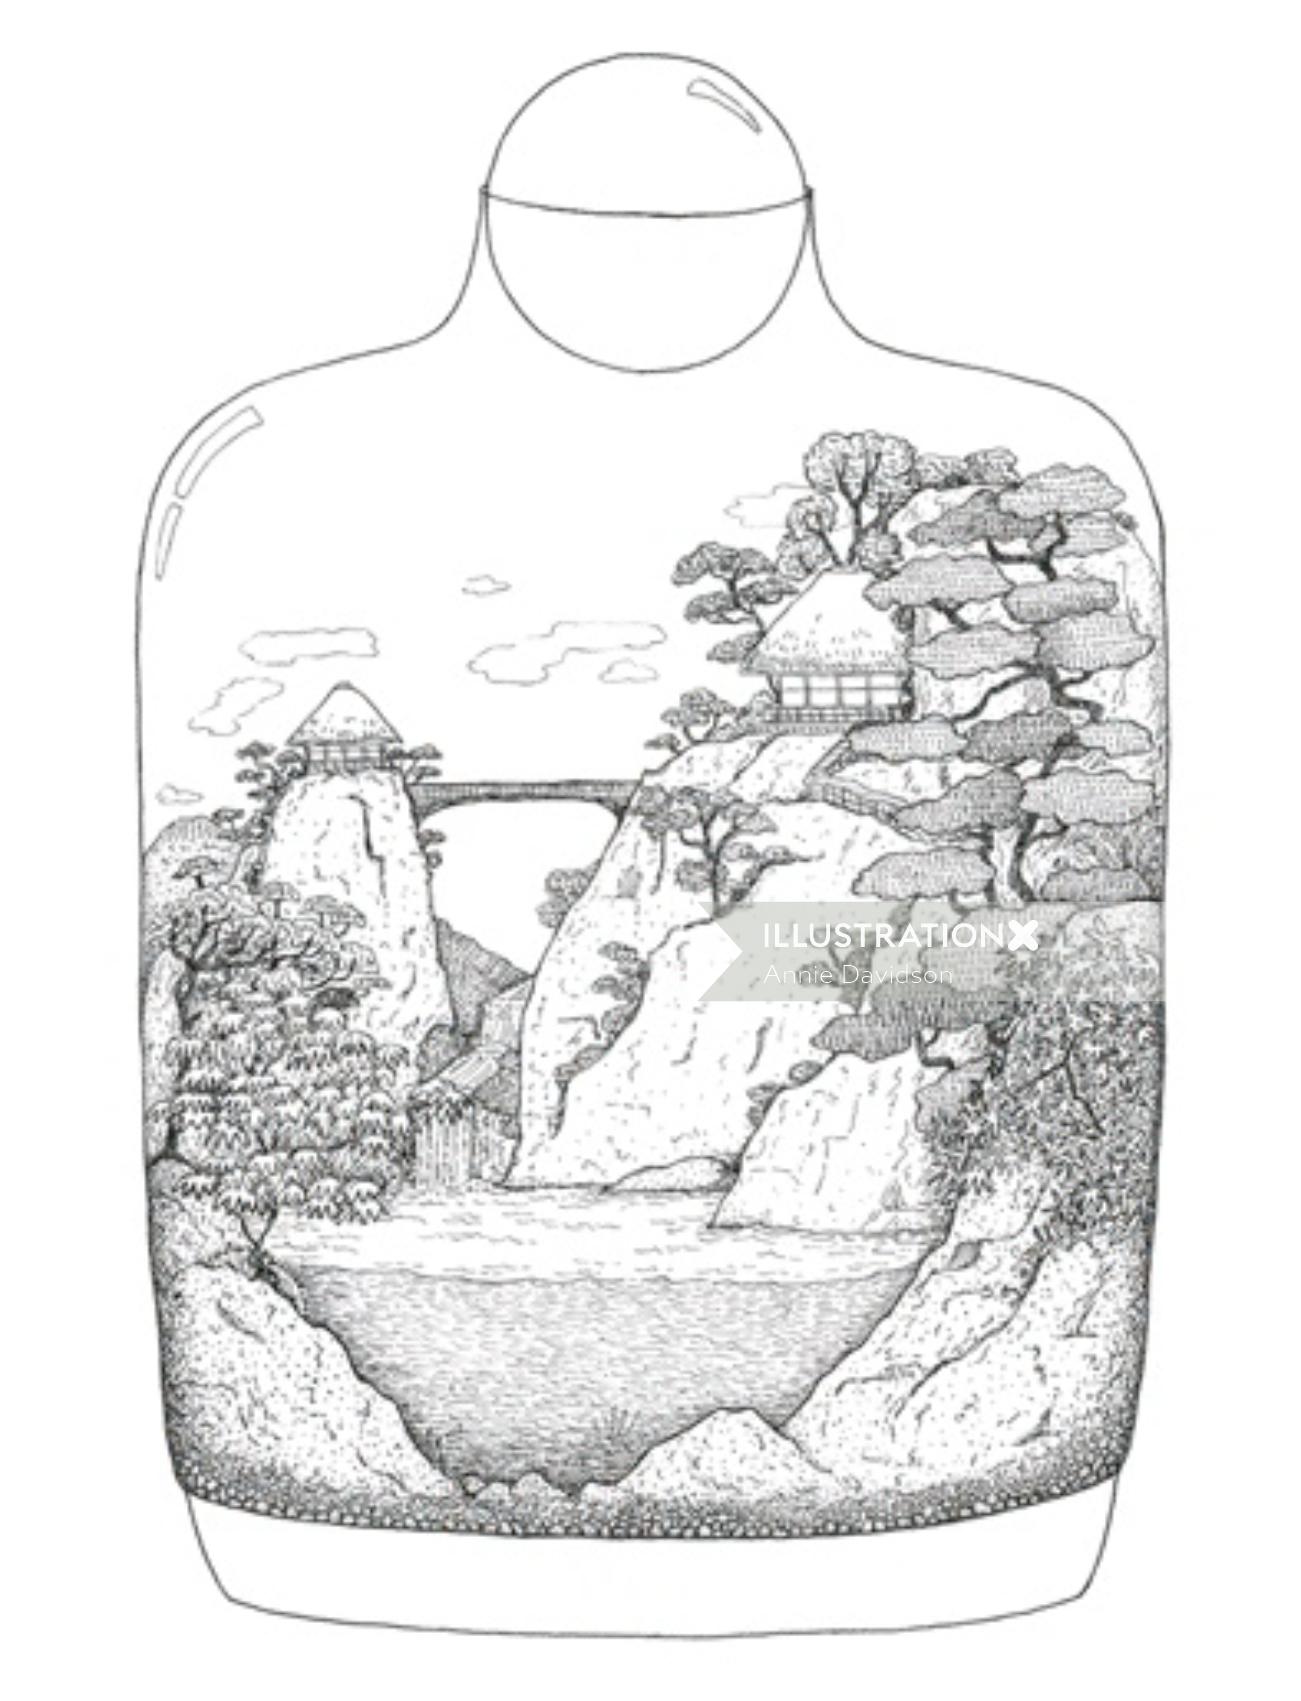 Animation of Japanese Landscape in glass pot